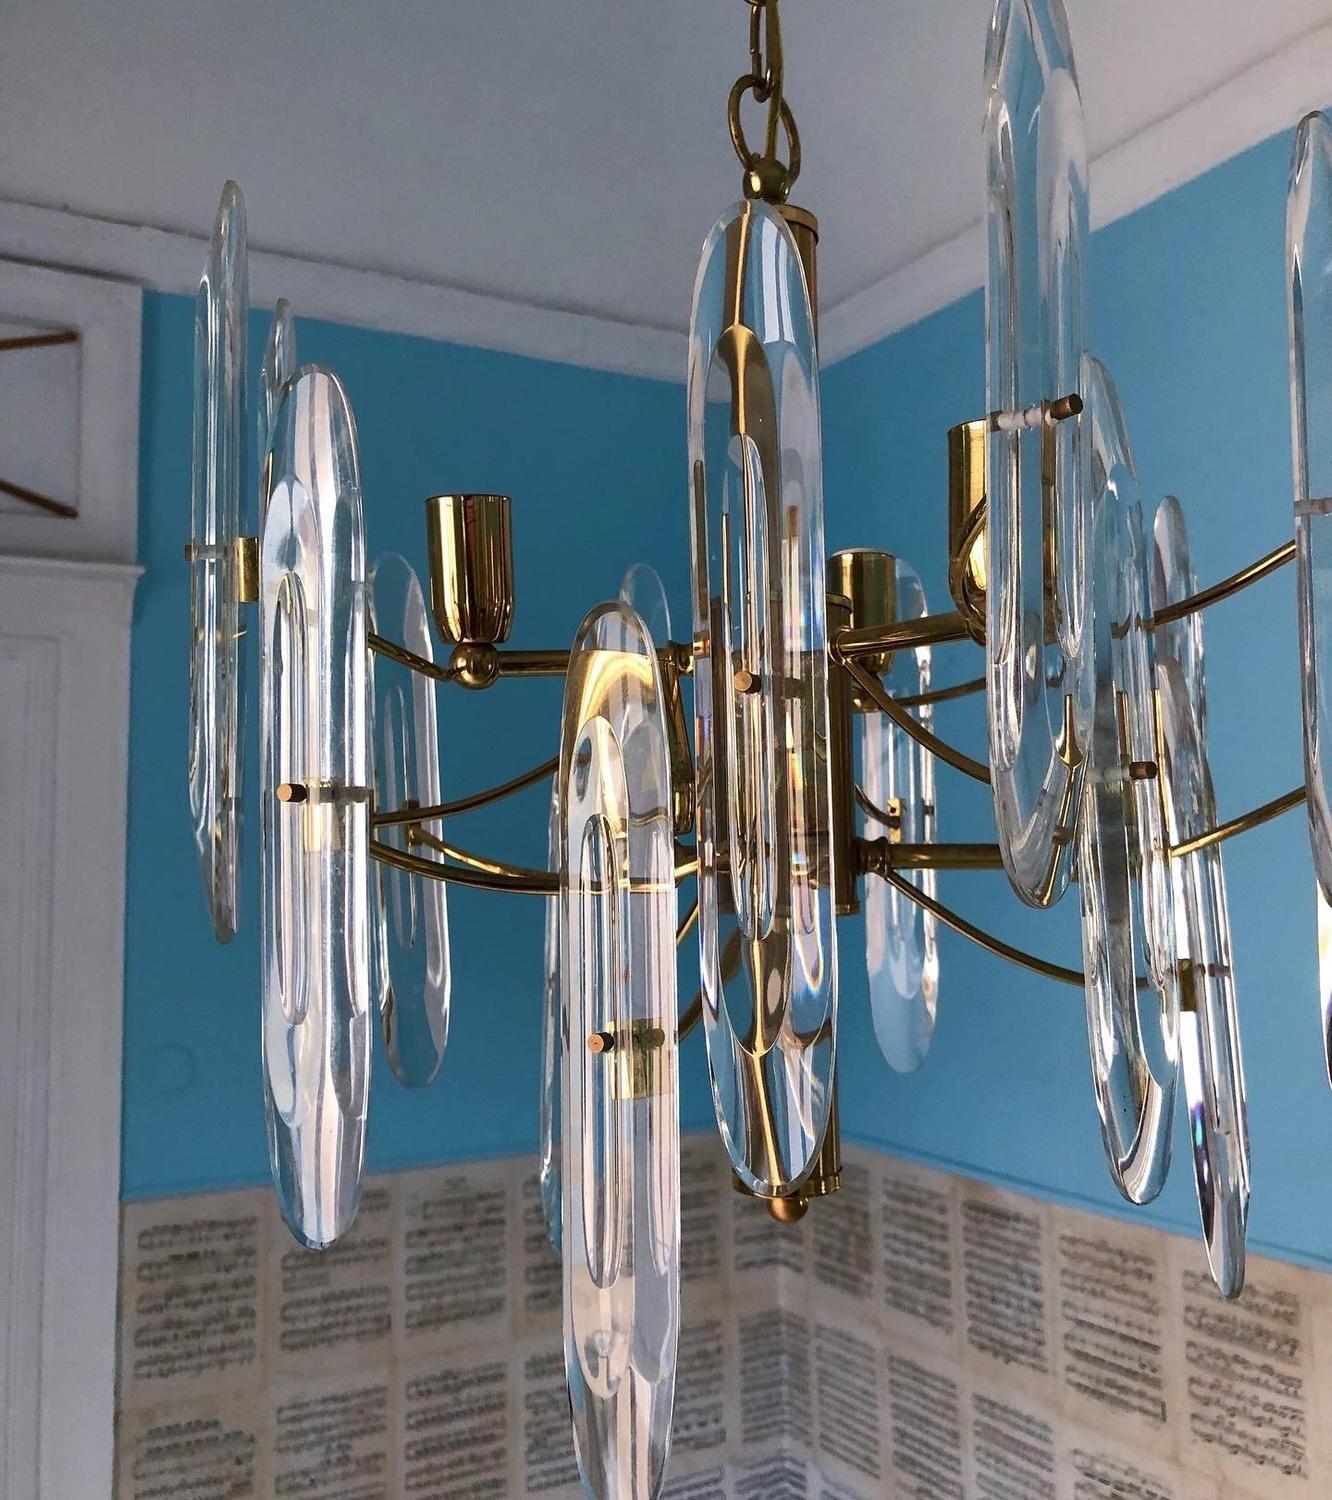 20th Century Italian Large Mid-Century Brass and Crystal Chandelier by Gaetano Sciolari, 70s For Sale